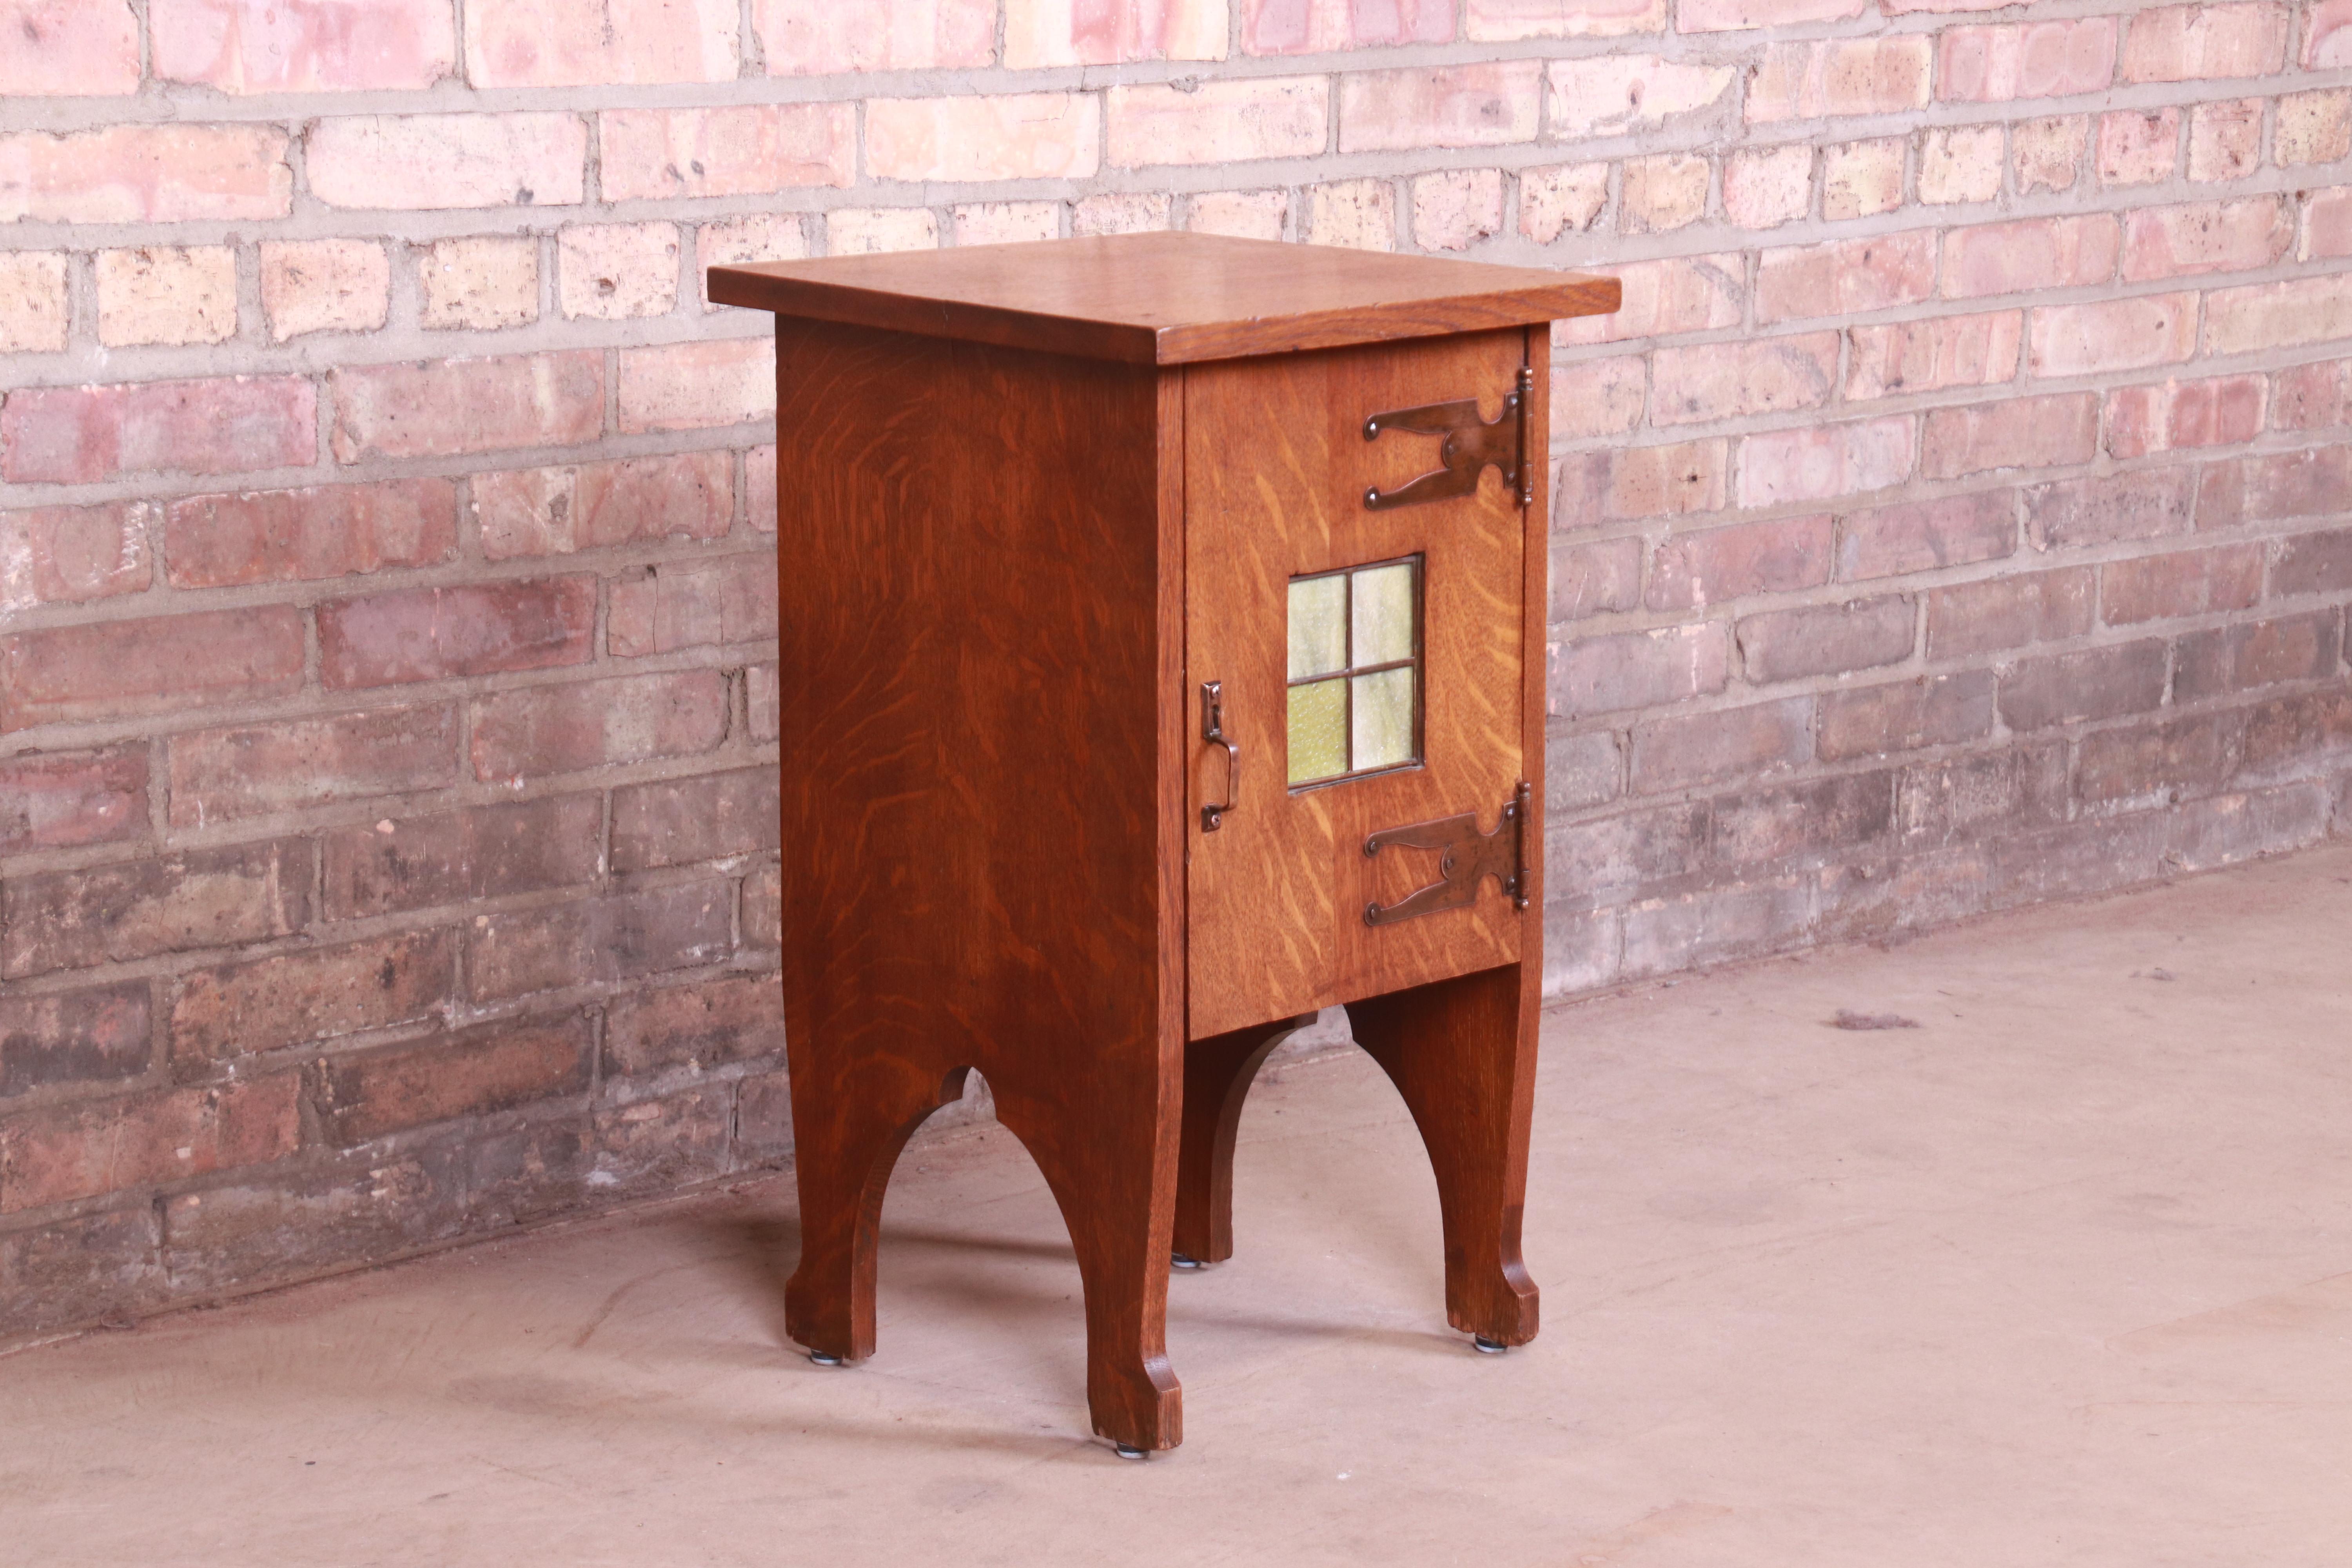 20th Century Antique Arts & Crafts Oak Side Table with Stained Glass Tile Insert, circa 1900